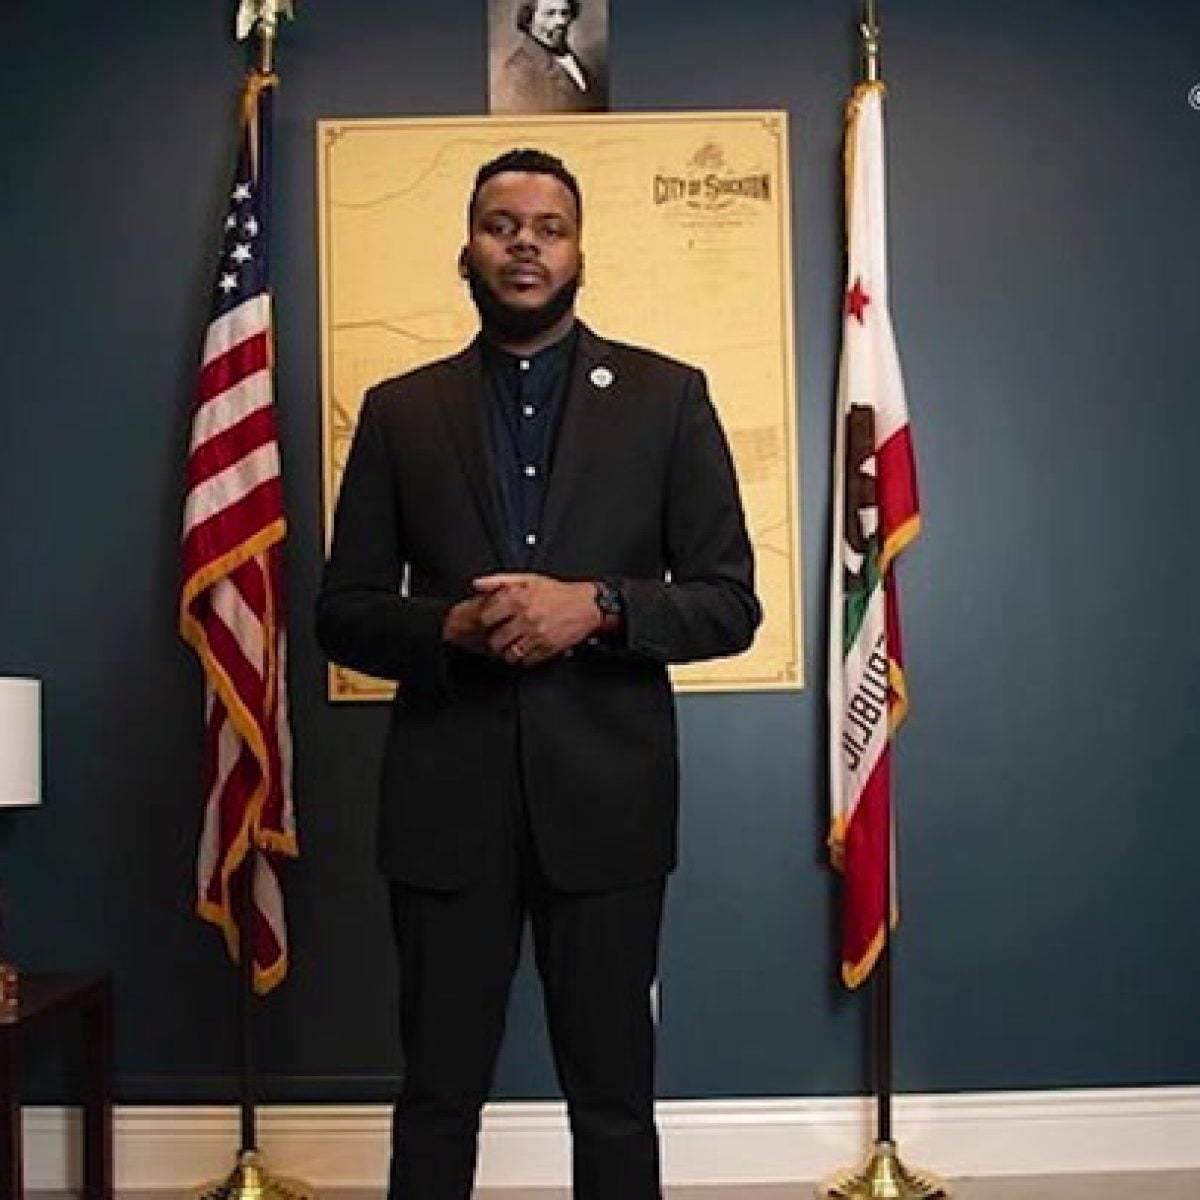 Michael Tubbs Was The Youngest And First Black Mayor Of Stockton, California. Now He’s Bringing His Ideas To The Whole State